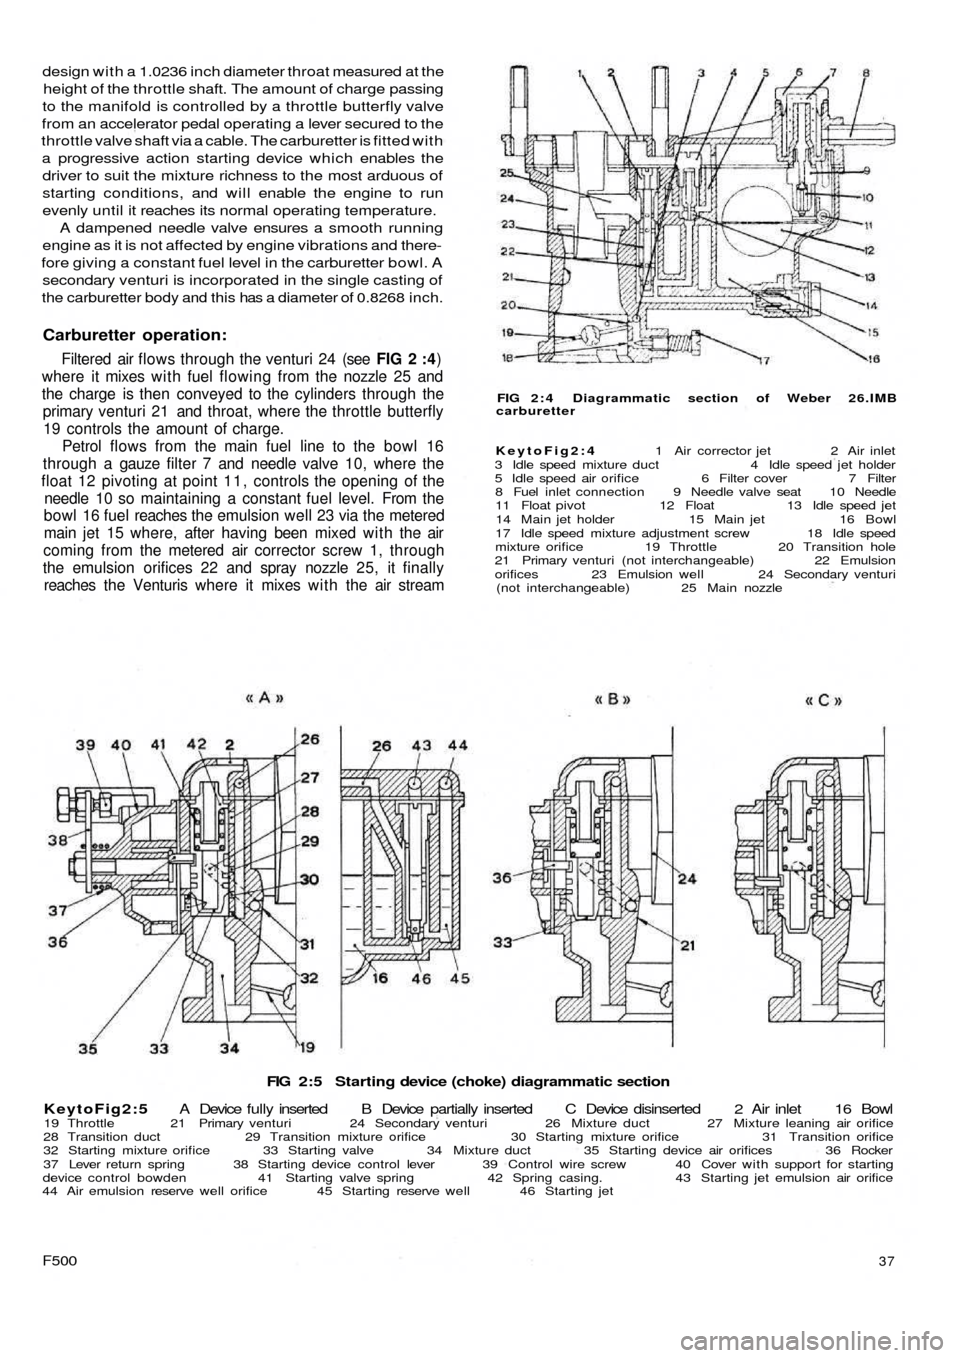 FIAT 500 1969 1.G Workshop Manual FIG 2:5  Starting device (choke) diagrammatic section
KeytoFig2:5 A  Device  fully inserted  B  Device  partially  inserted  C  Device  disinserted  2  Air  inlet 16 Bowl
19 Throttle  21 Primary ventu